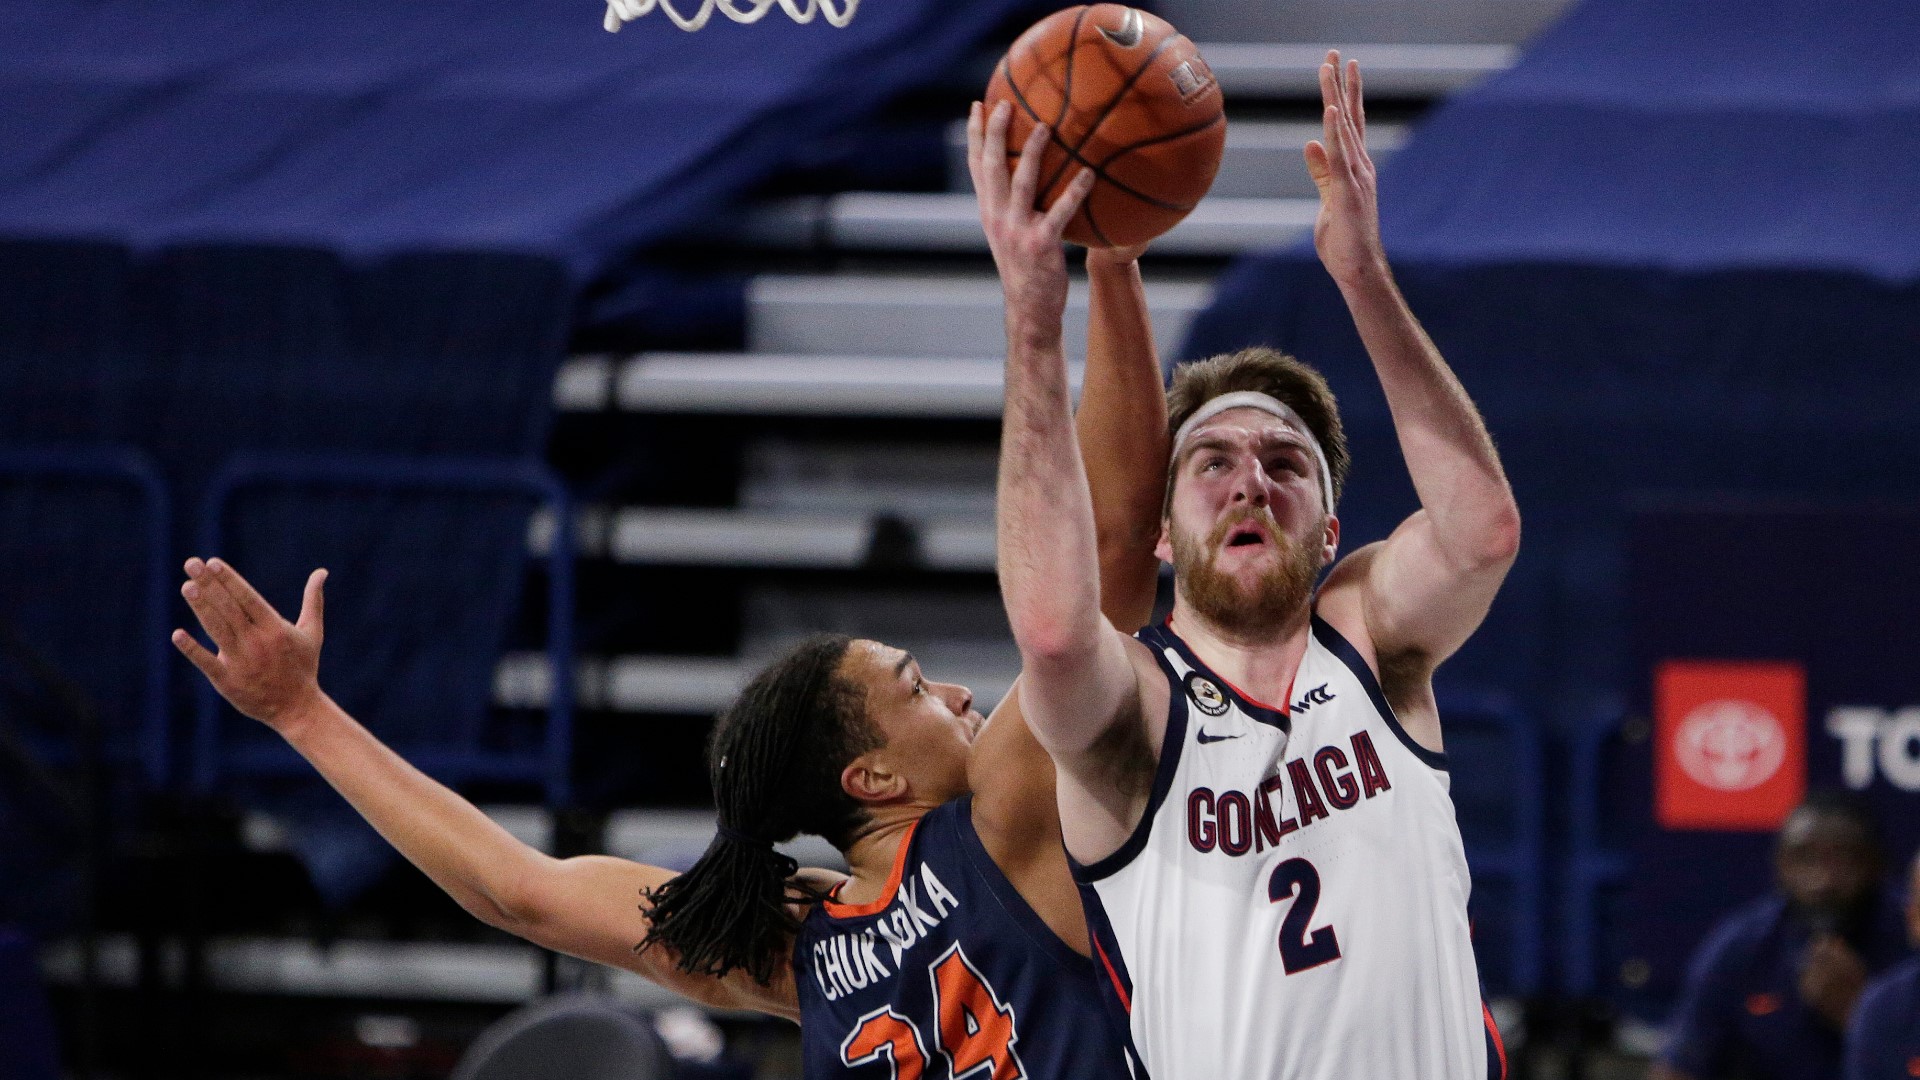 Gonzaga has now beaten the Waves 40 straight times.